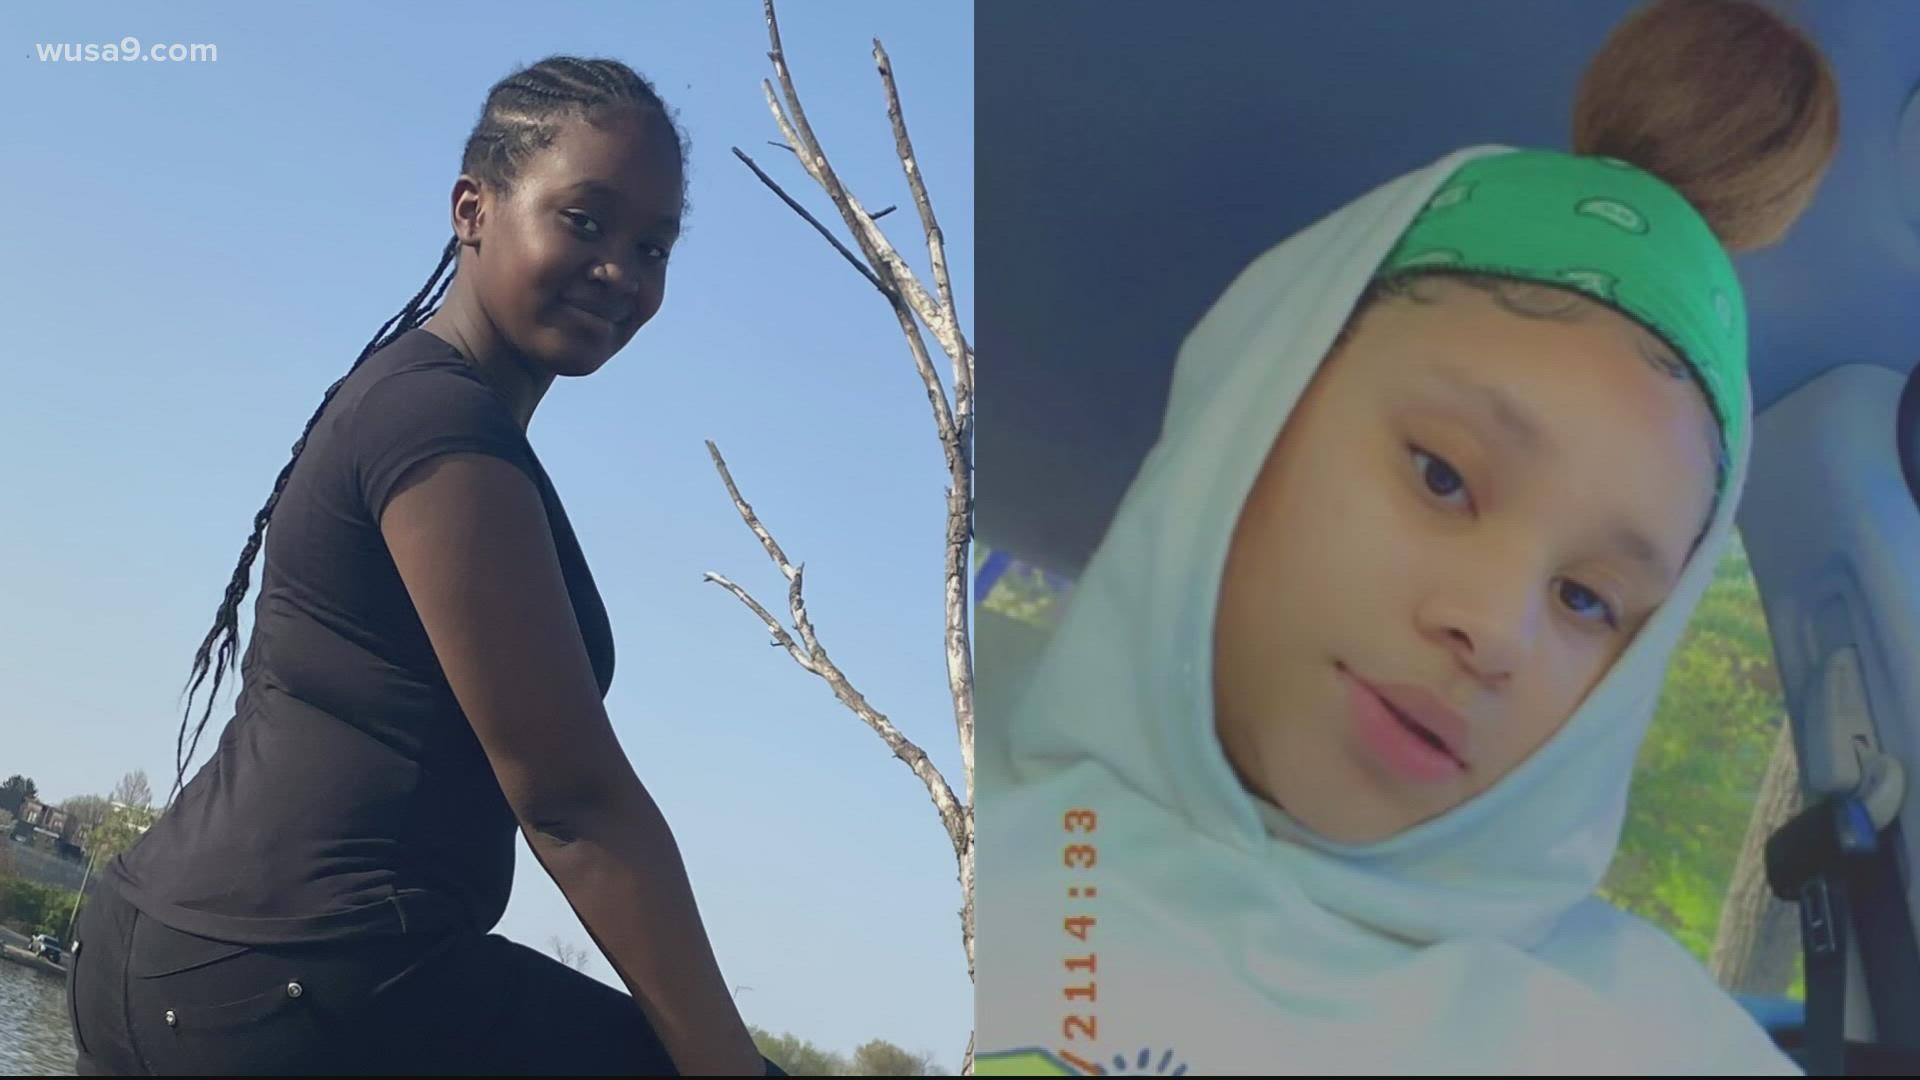 Alaiya Robinson and Jeniah Clayton-Bowman, 13, have been found and are safe, according to Prince George's County Police.